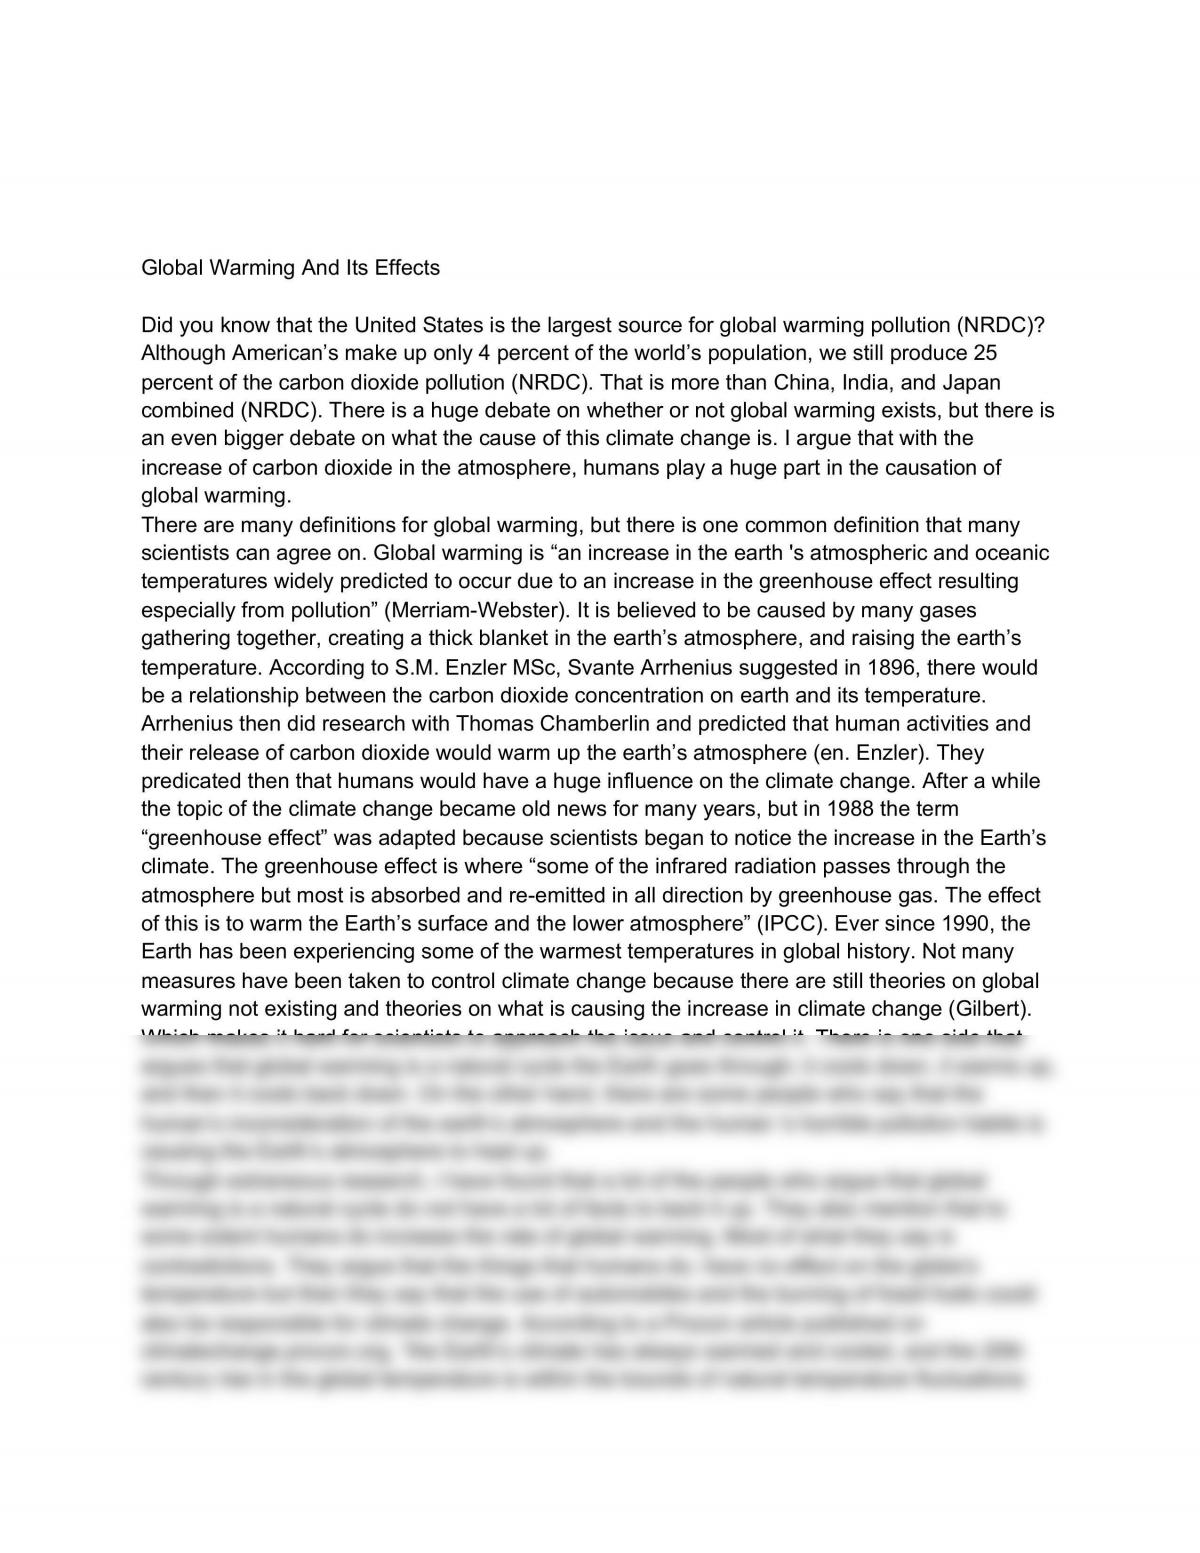 Global Warming And Its Effects - Page 1